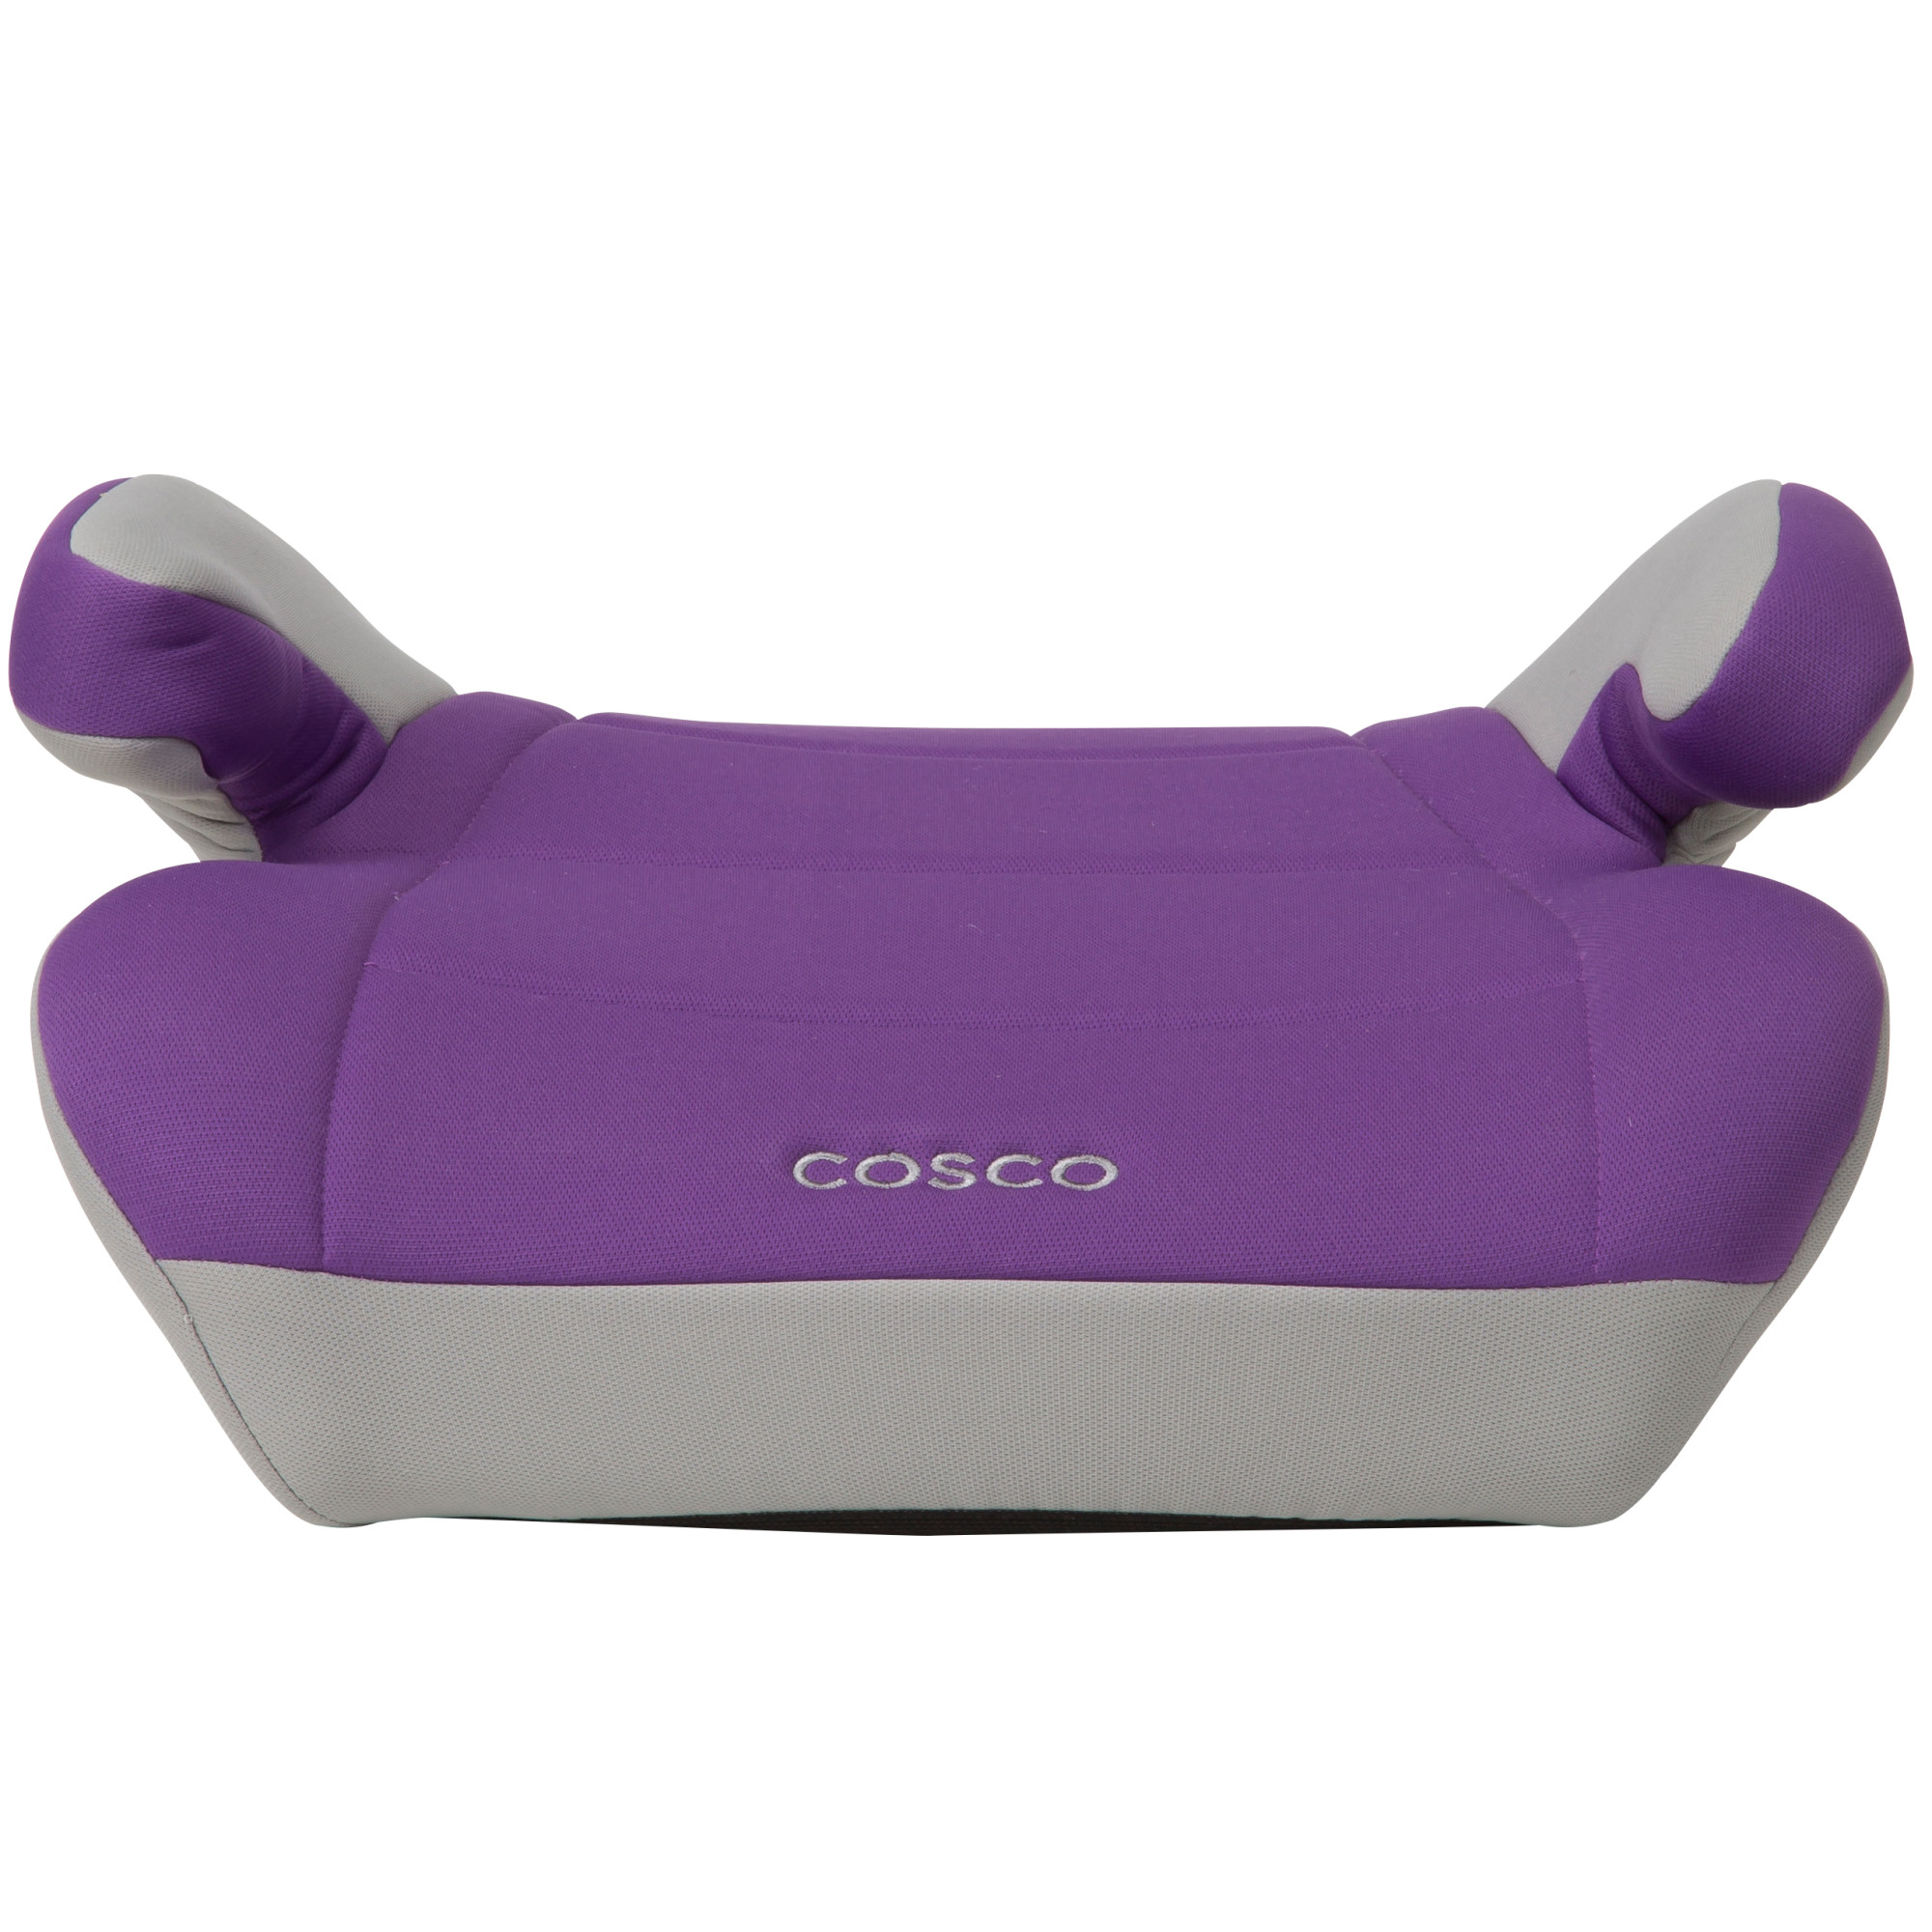 Cosco Topside Booster Car Seat - image 1 of 4